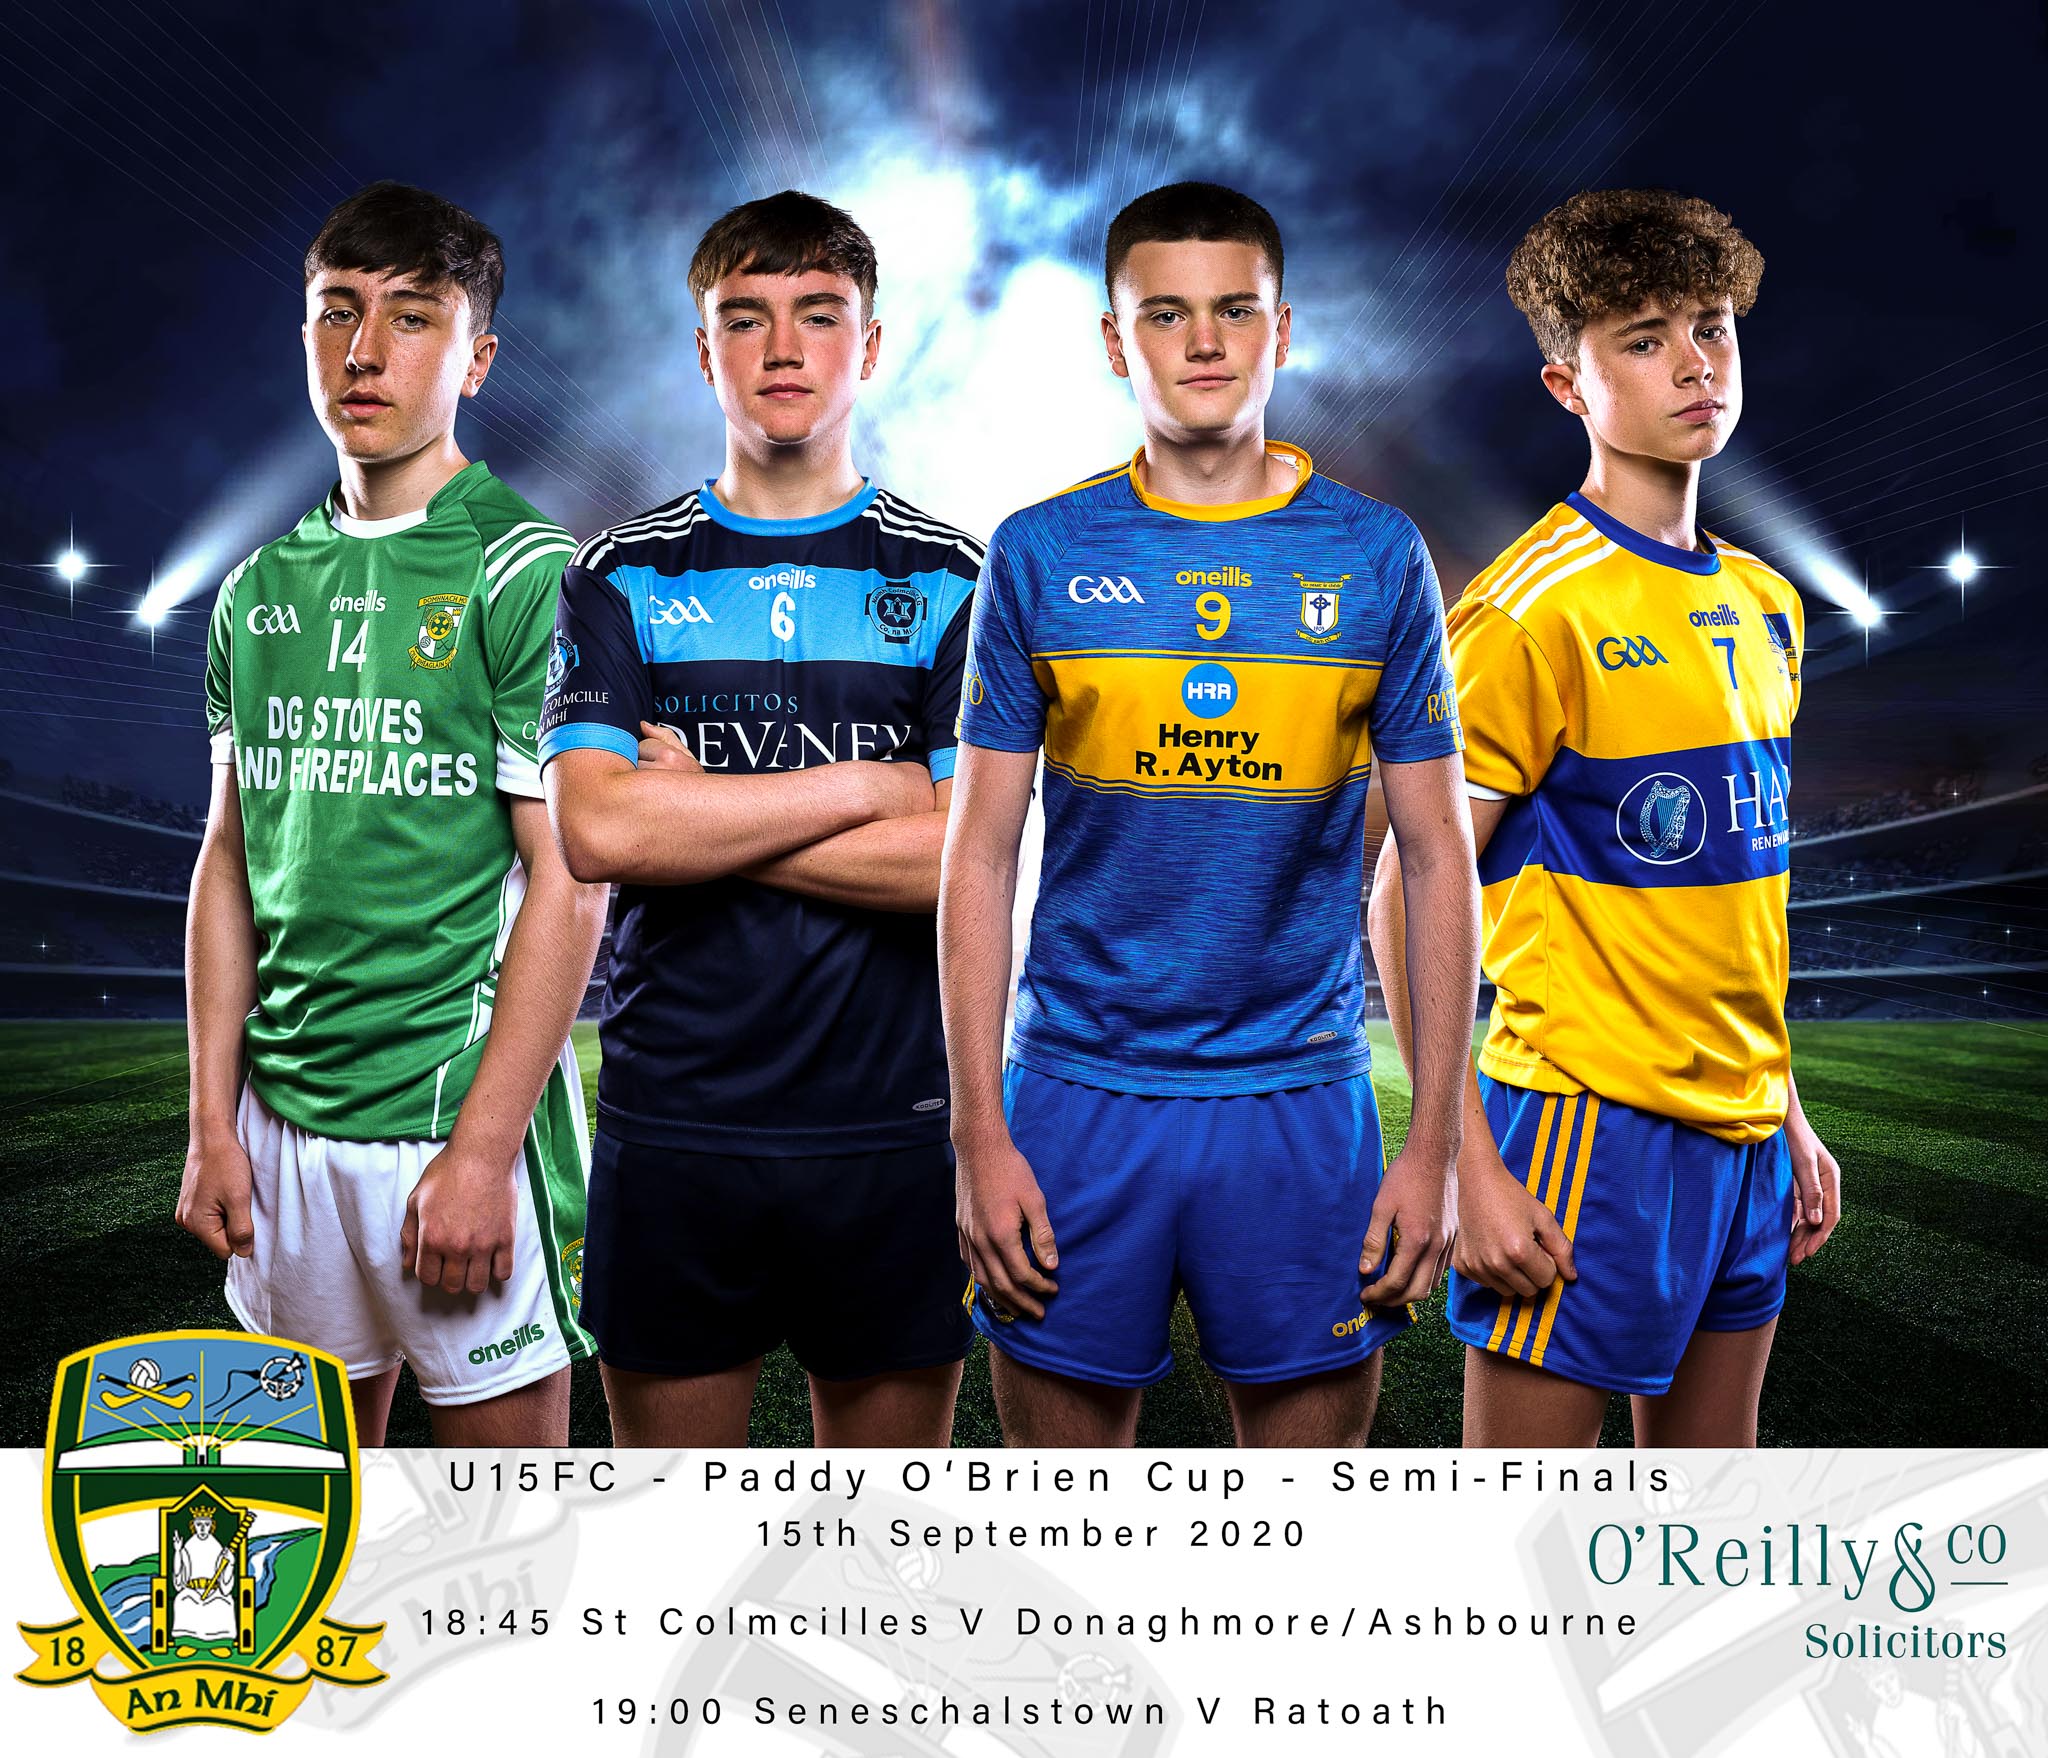 O’Reilly & Co. Solicitors U-15 Football Championship – Paddy O’Brien Cup Division 1 semi-finals